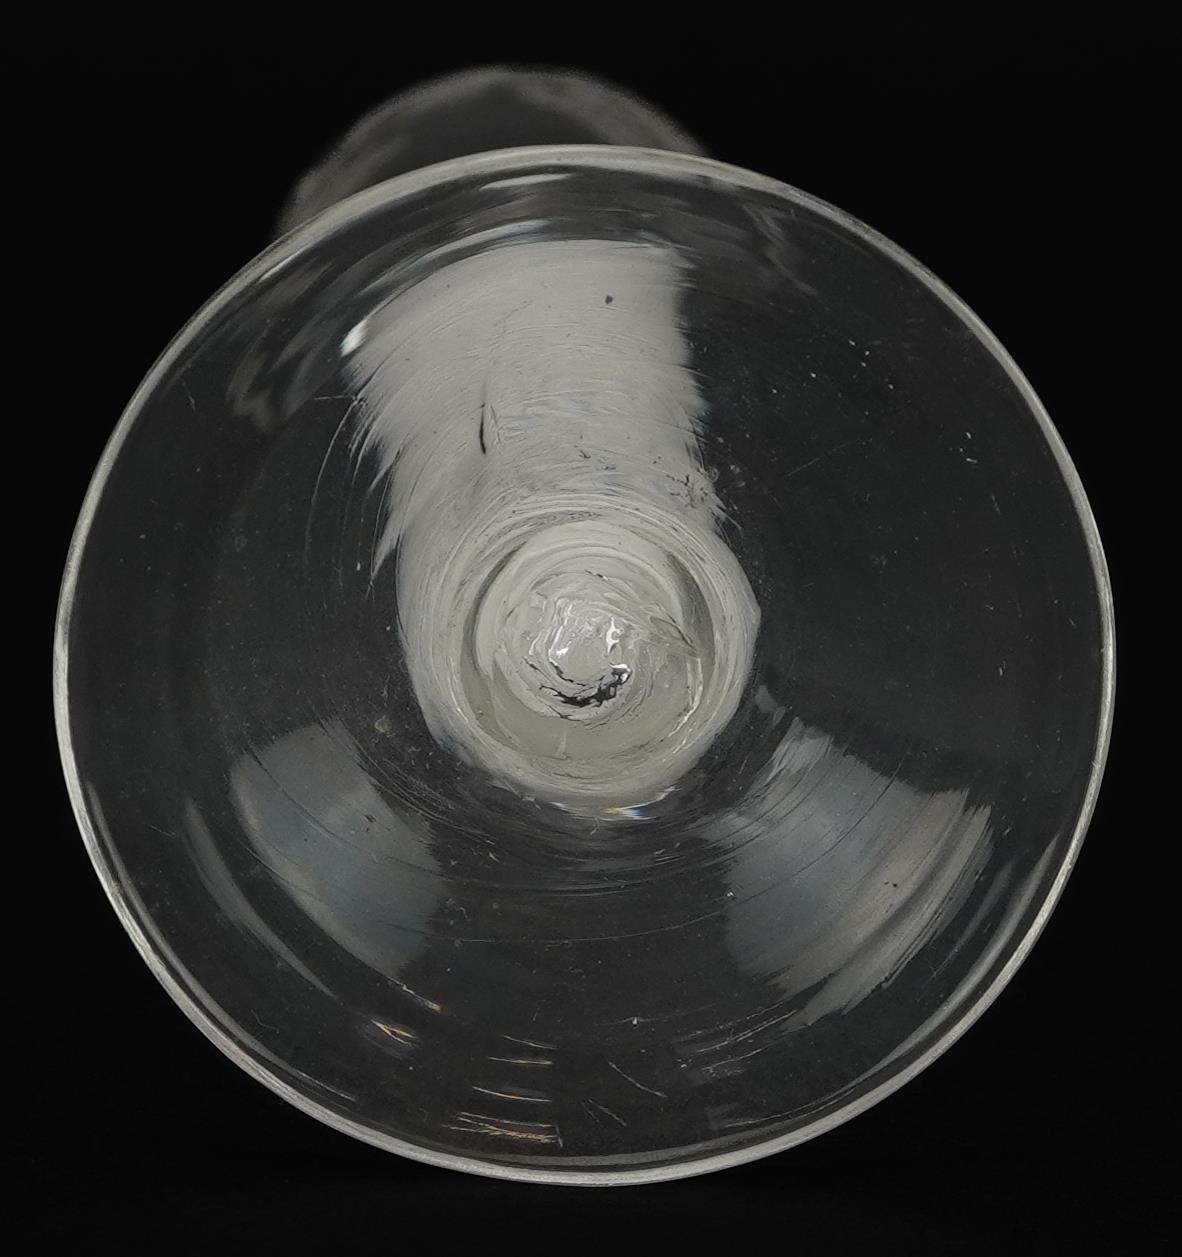 18th century cordial glass with multiple opaque twist stem and floral engraved bowl, 16.5cm high - Image 5 of 5